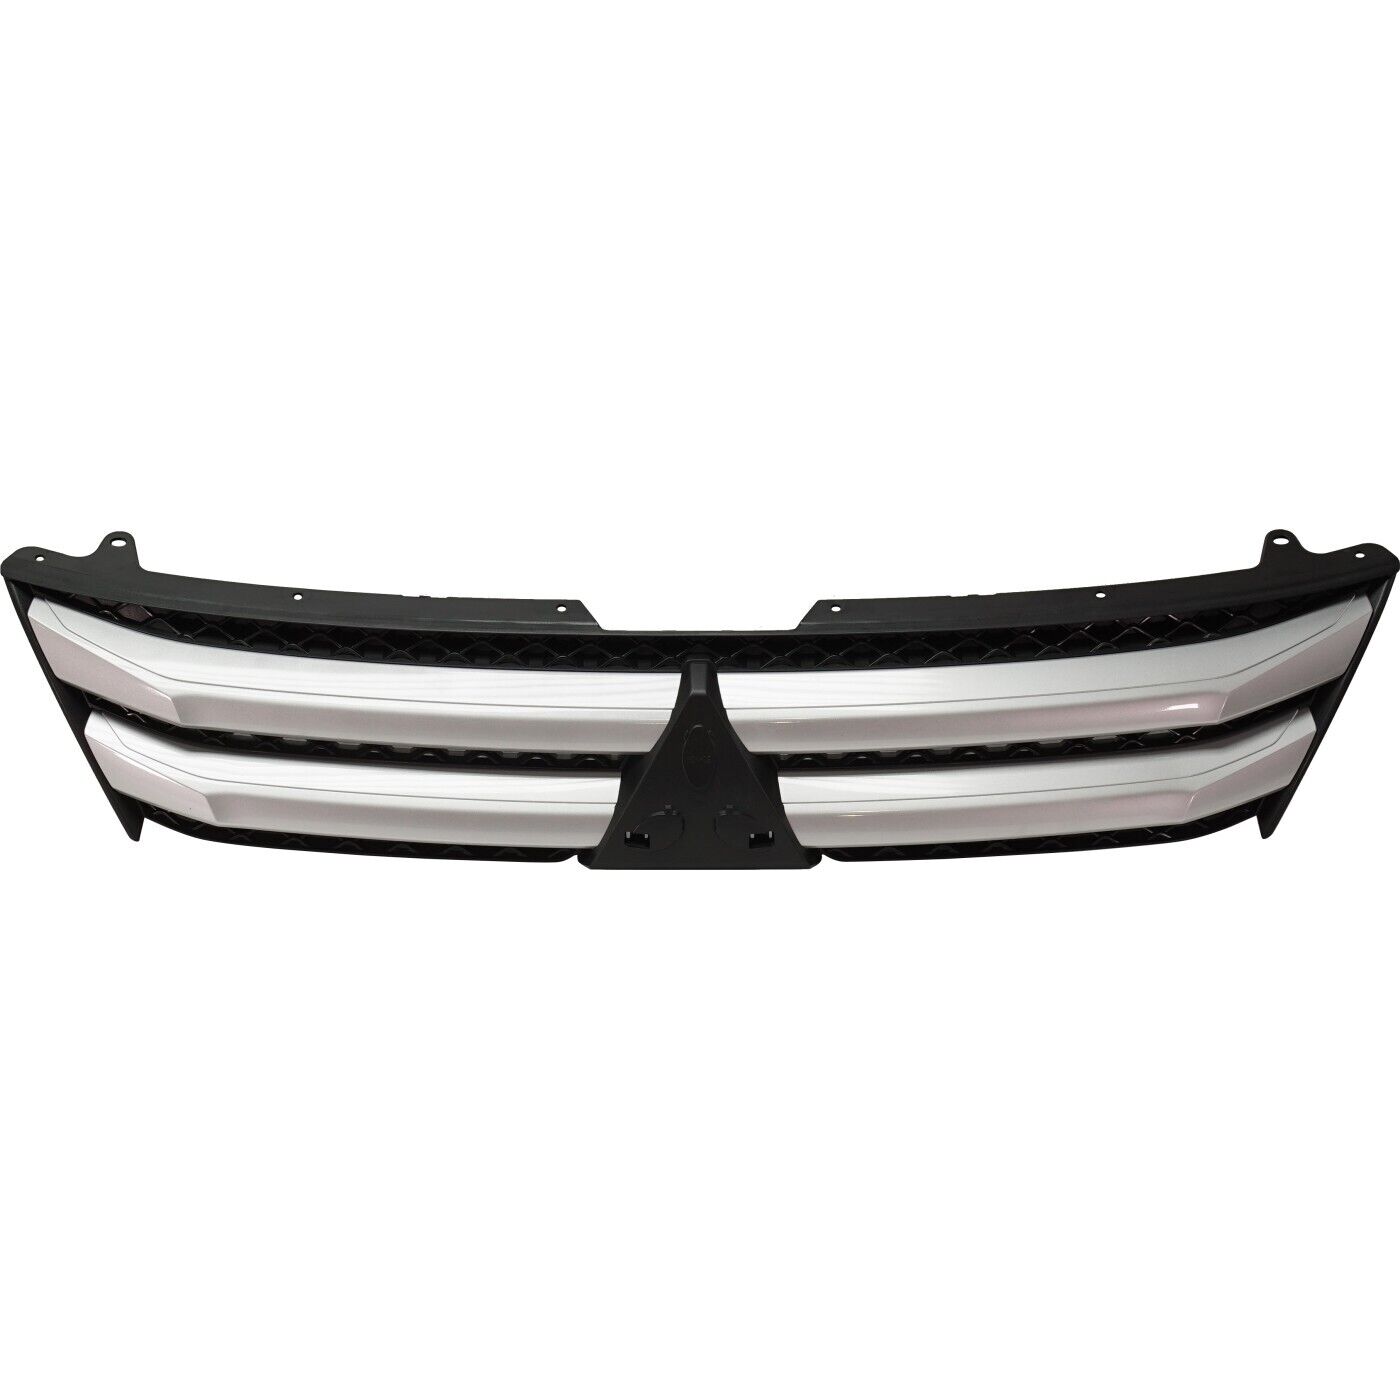 Grille Grill 7450B048 for Mitsubishi Eclipse Cross 2018-2020